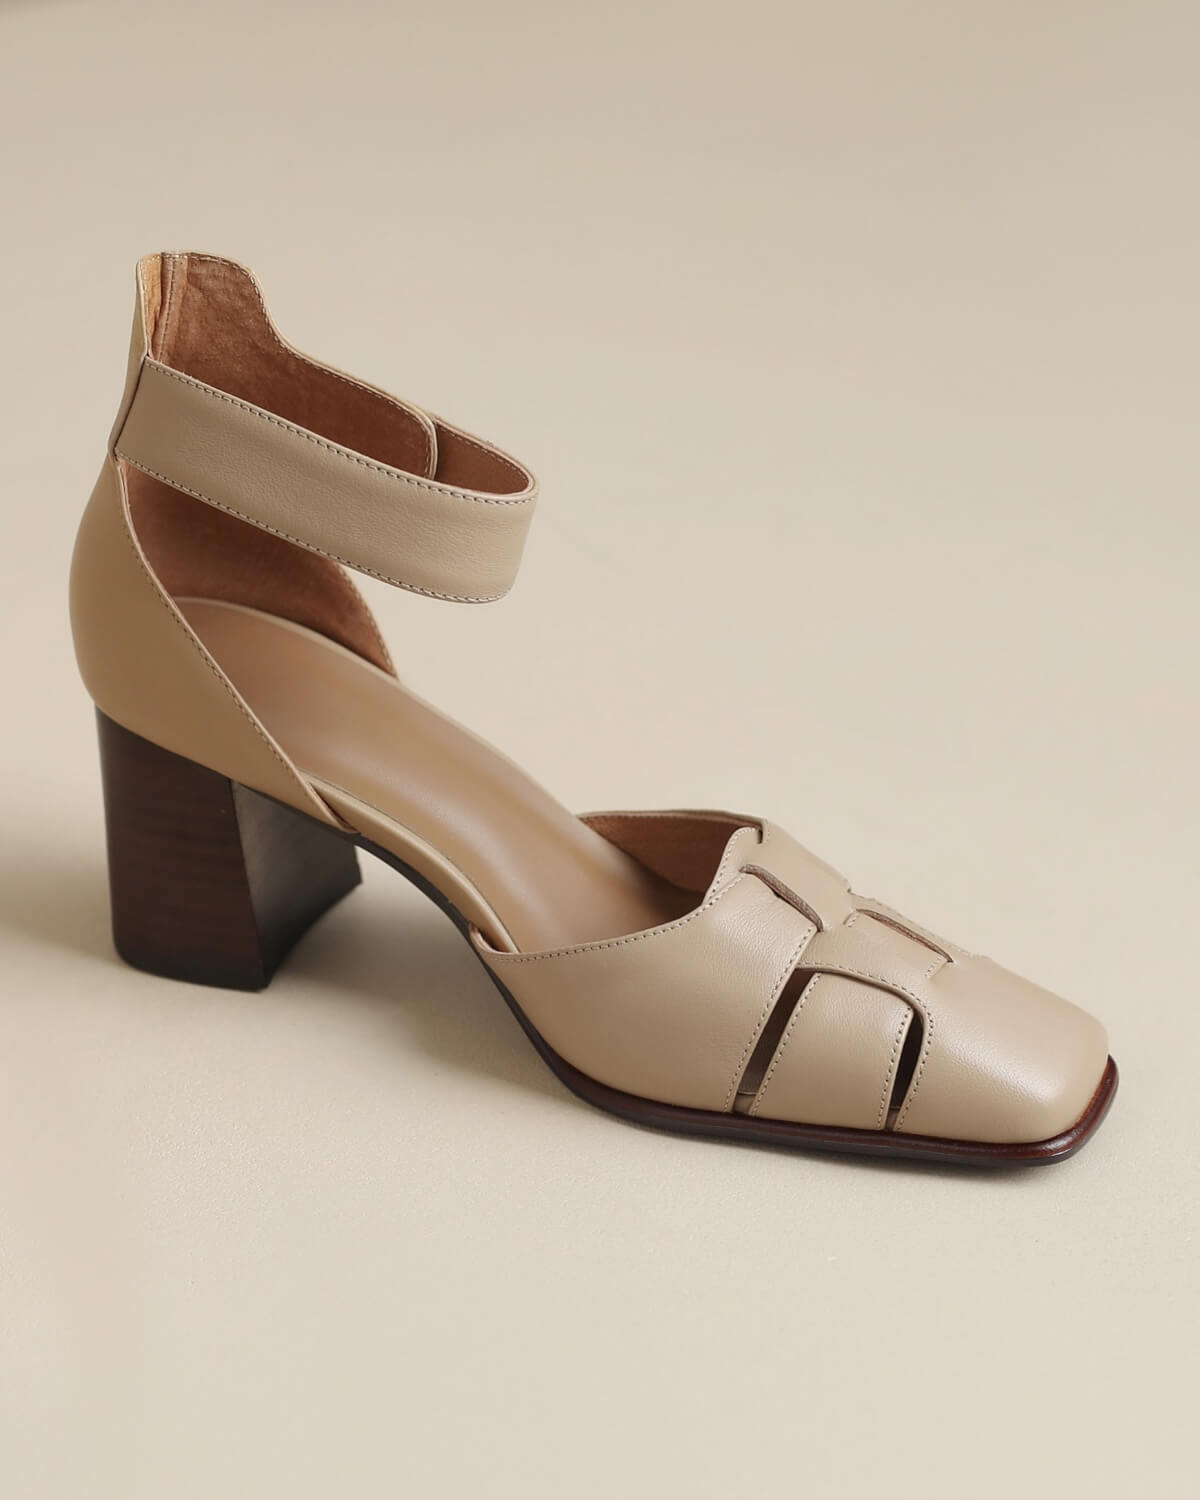 Verna-Square-Toe-Nude-Leather-Ankle-Strap-Heels-1